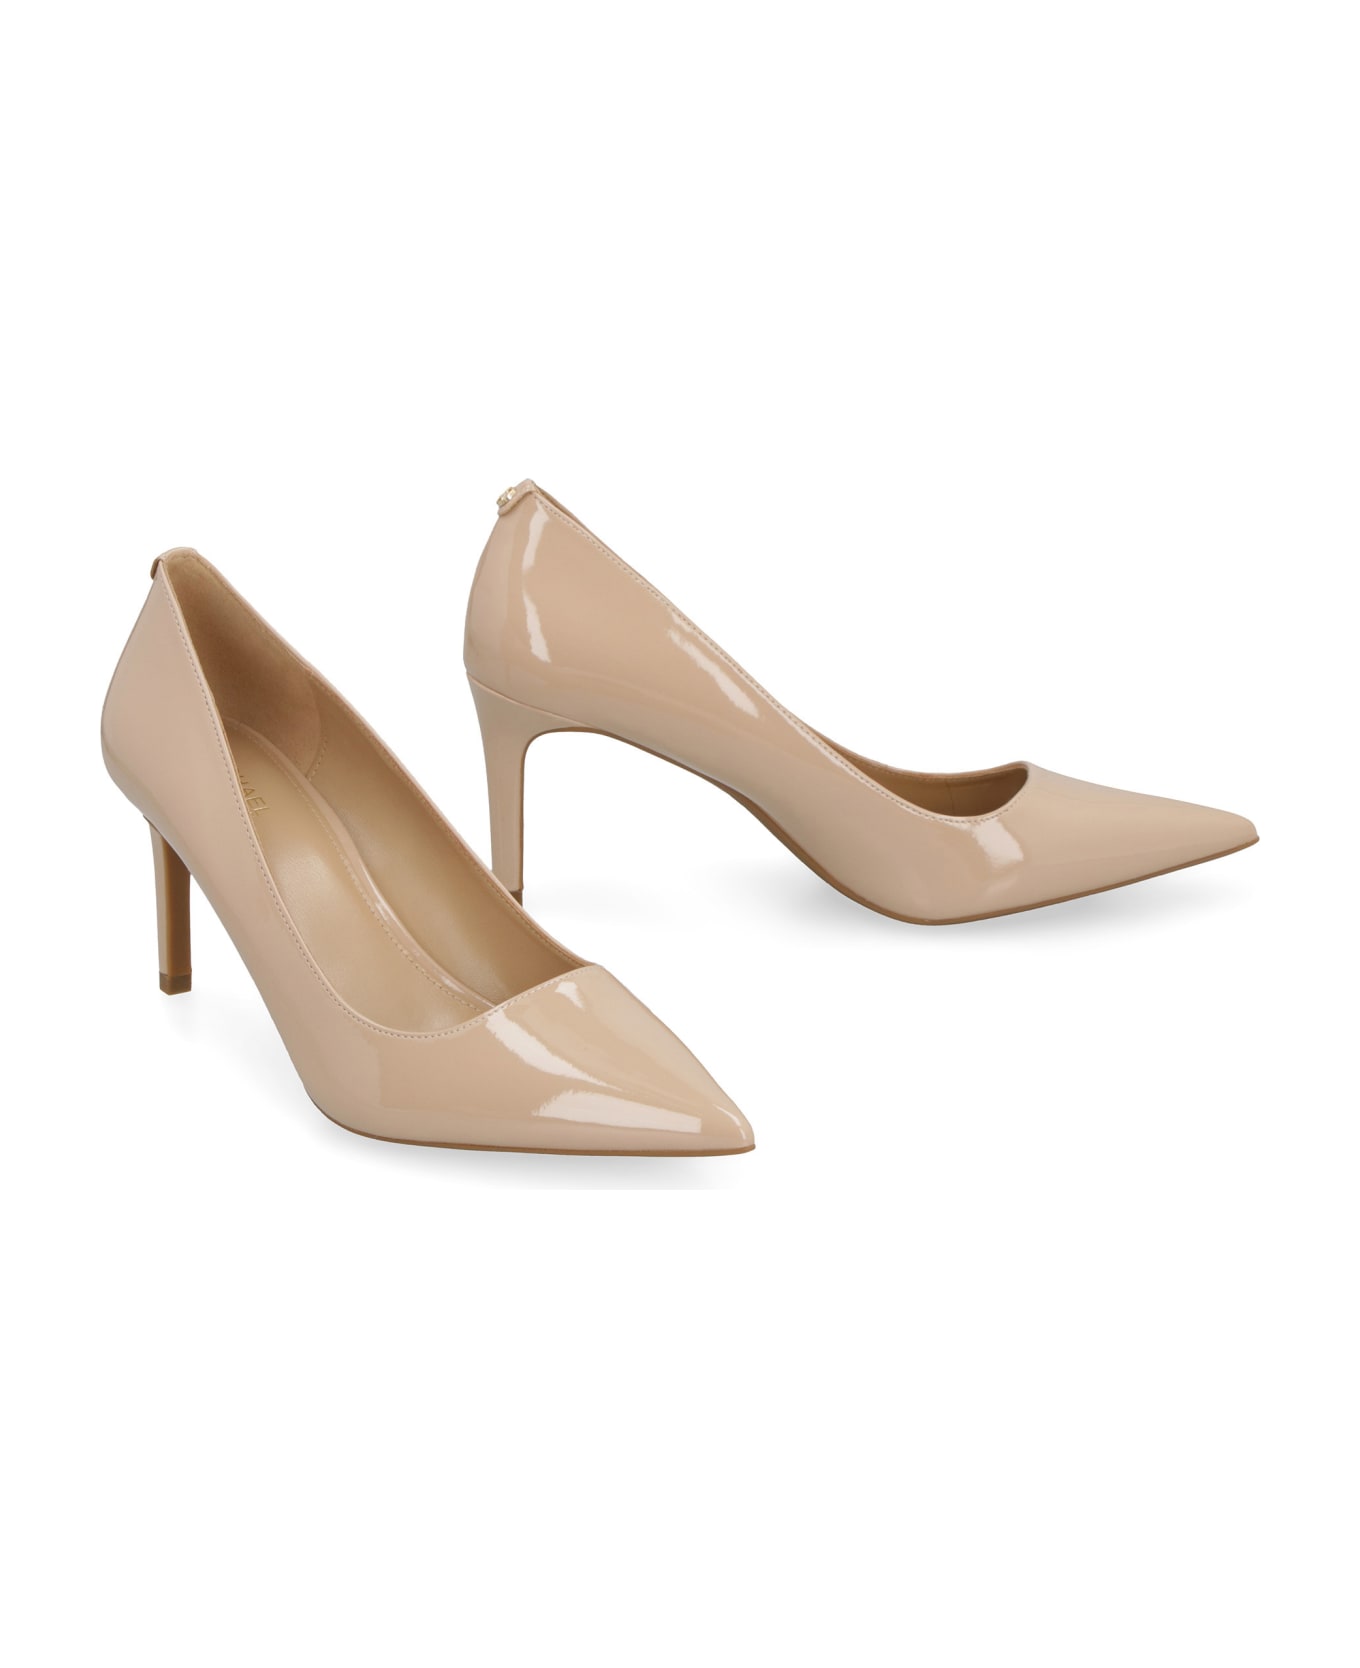 Michael Kors Collection Alina Patent Pointy-toe Pumps - Light Blush